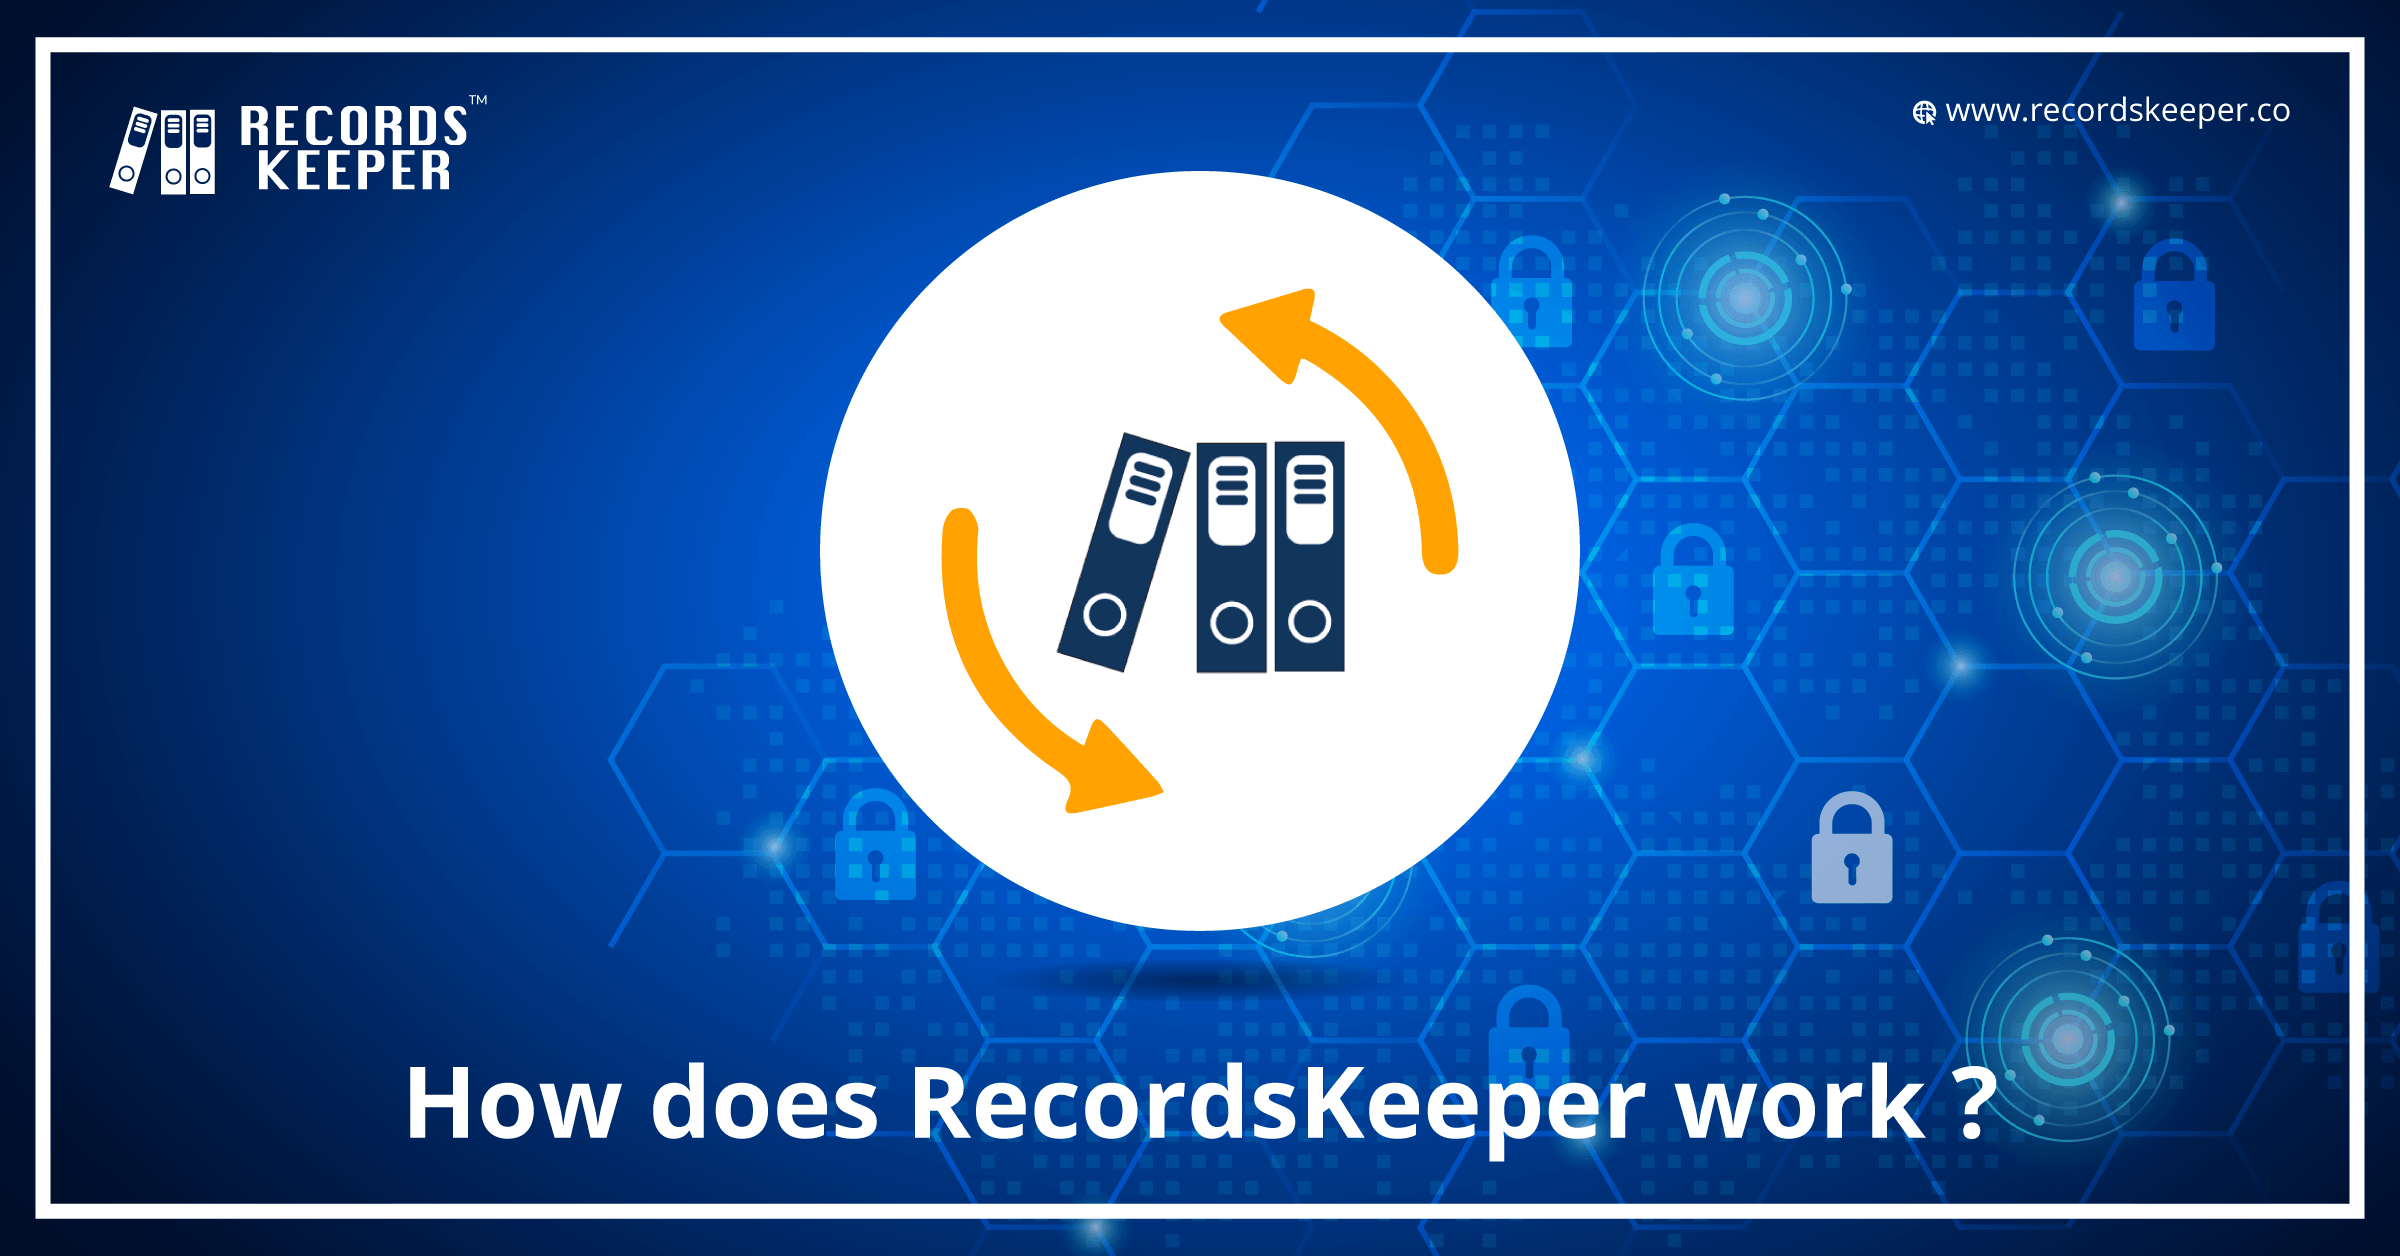 How does RecordsKeeper work?